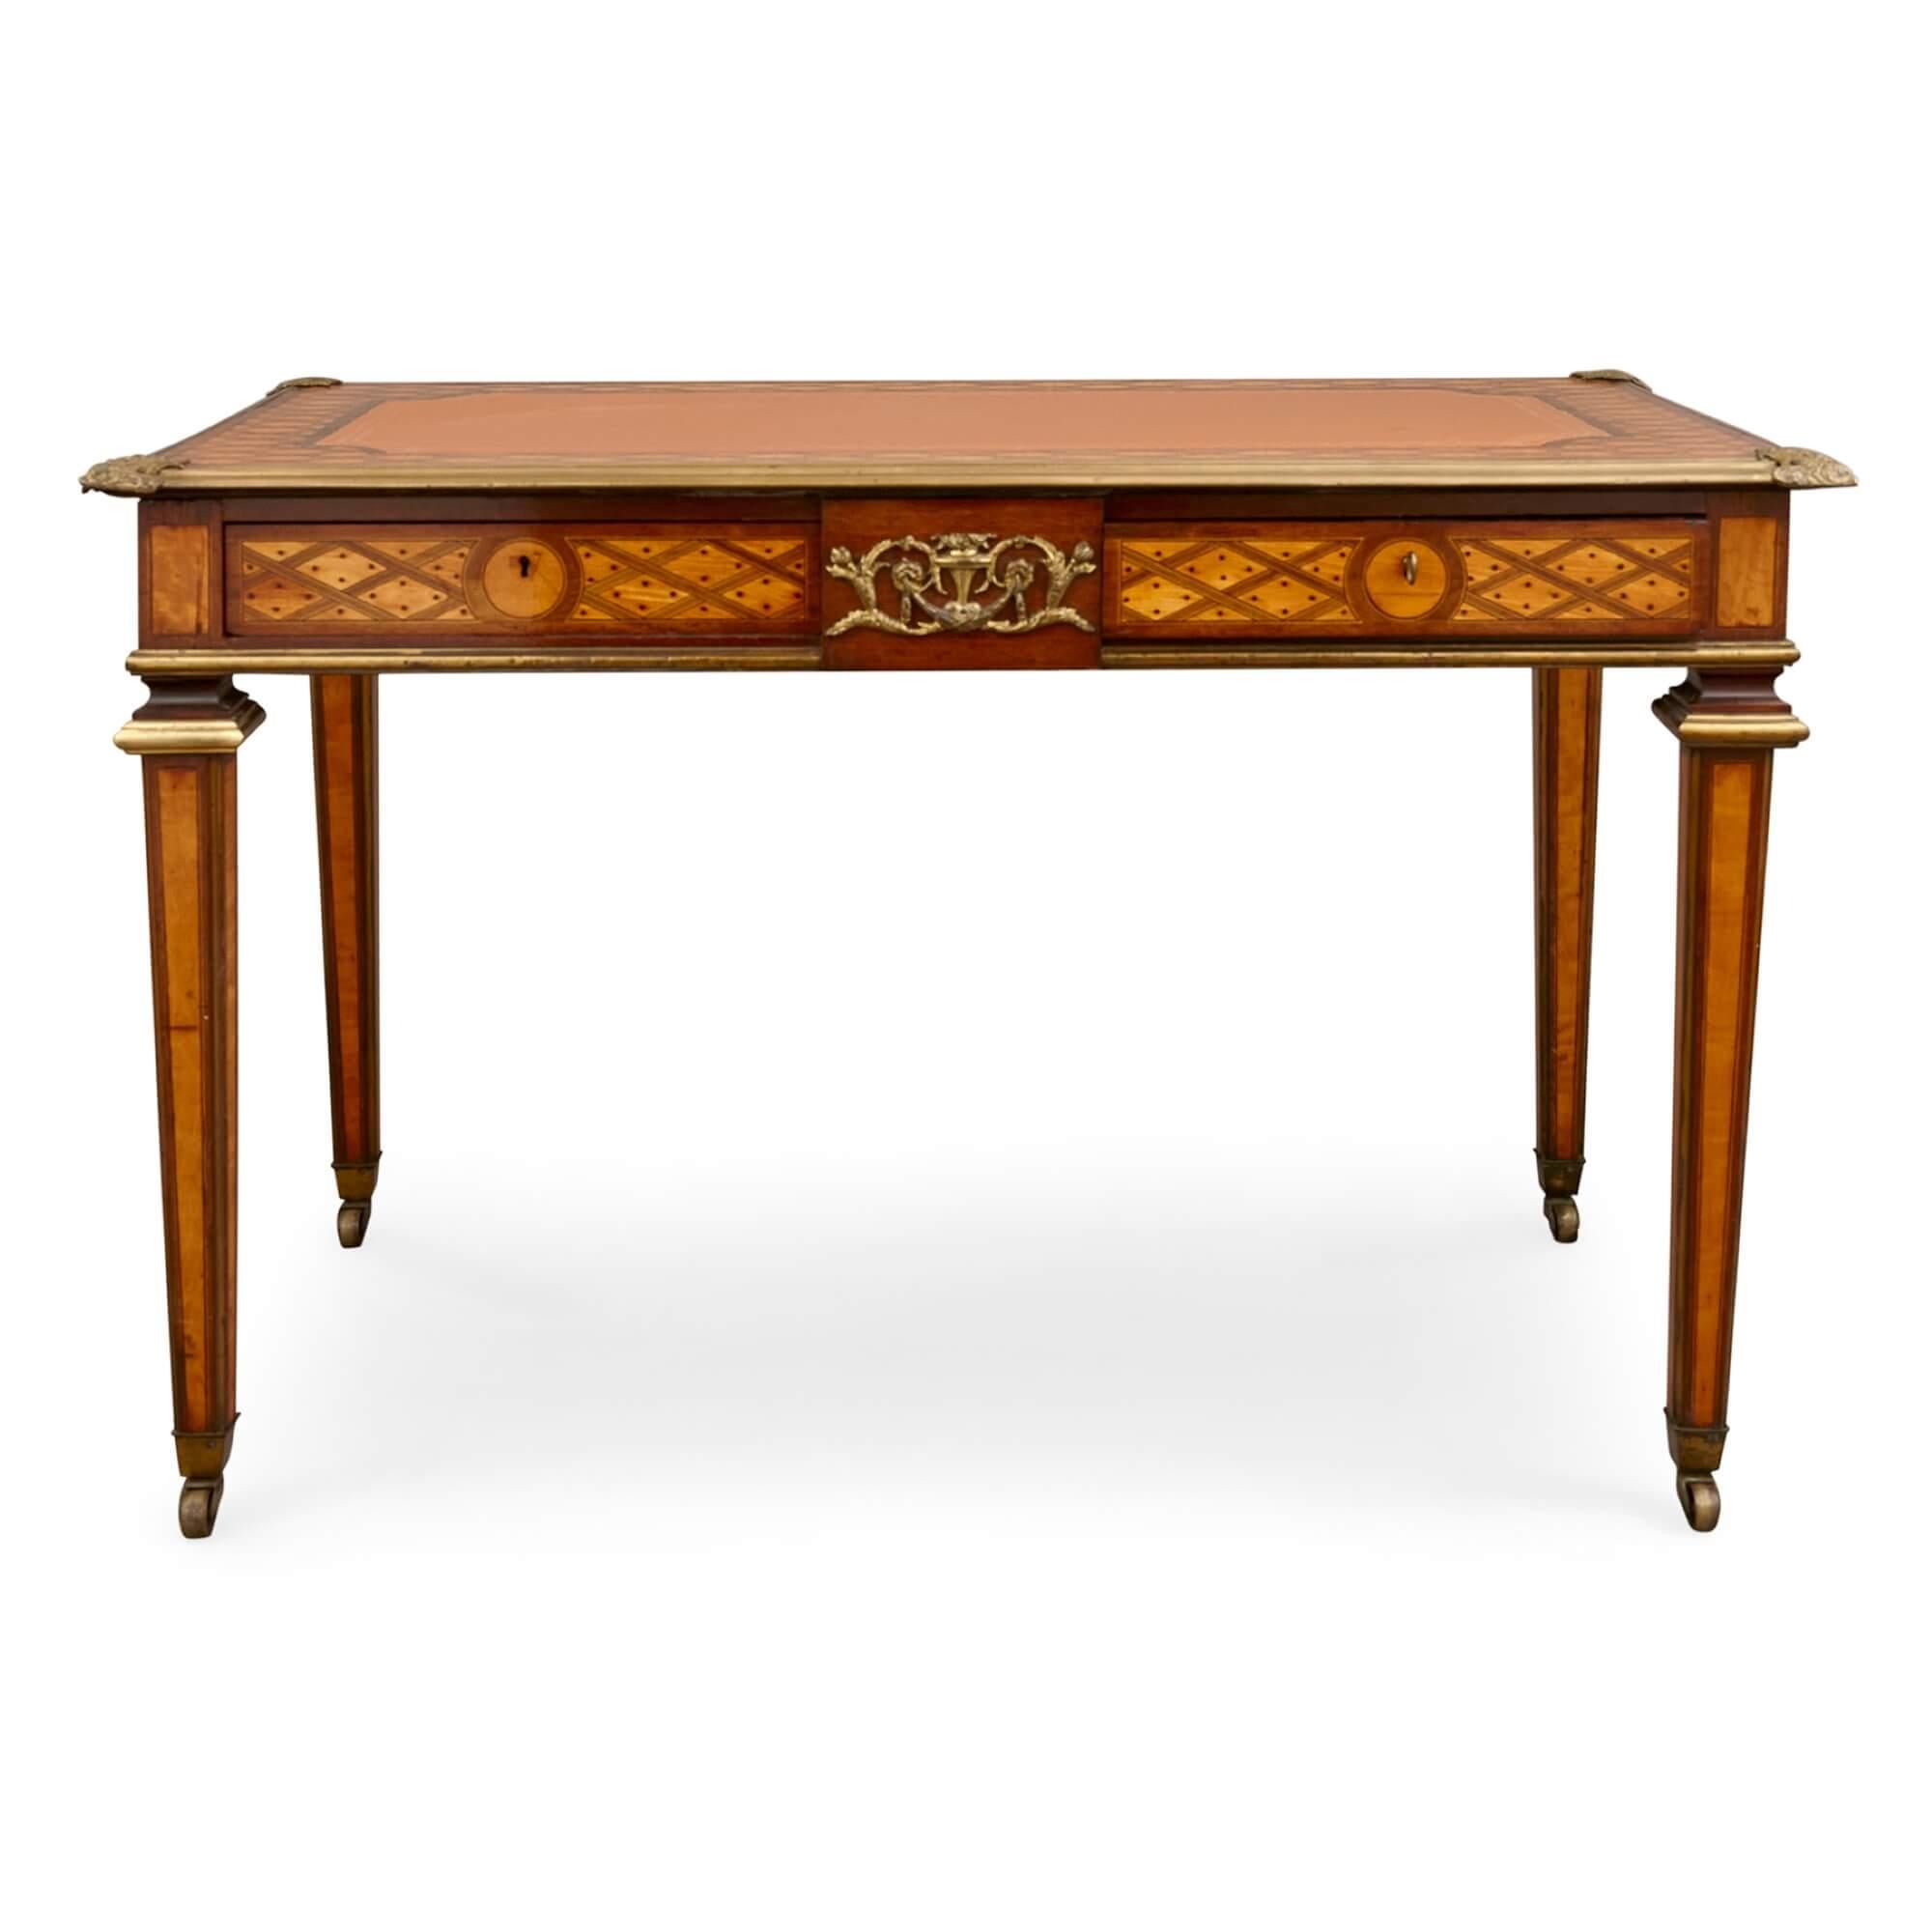 Antique parquetry, ormolu and leather bureau plat by Ross 
English, 19th Century
Height 76cm, width 120cm, depth 69cm

Made by the renowned English furniture maker Donald Ross, this desk is a demonstration of some of his finest work. 

The